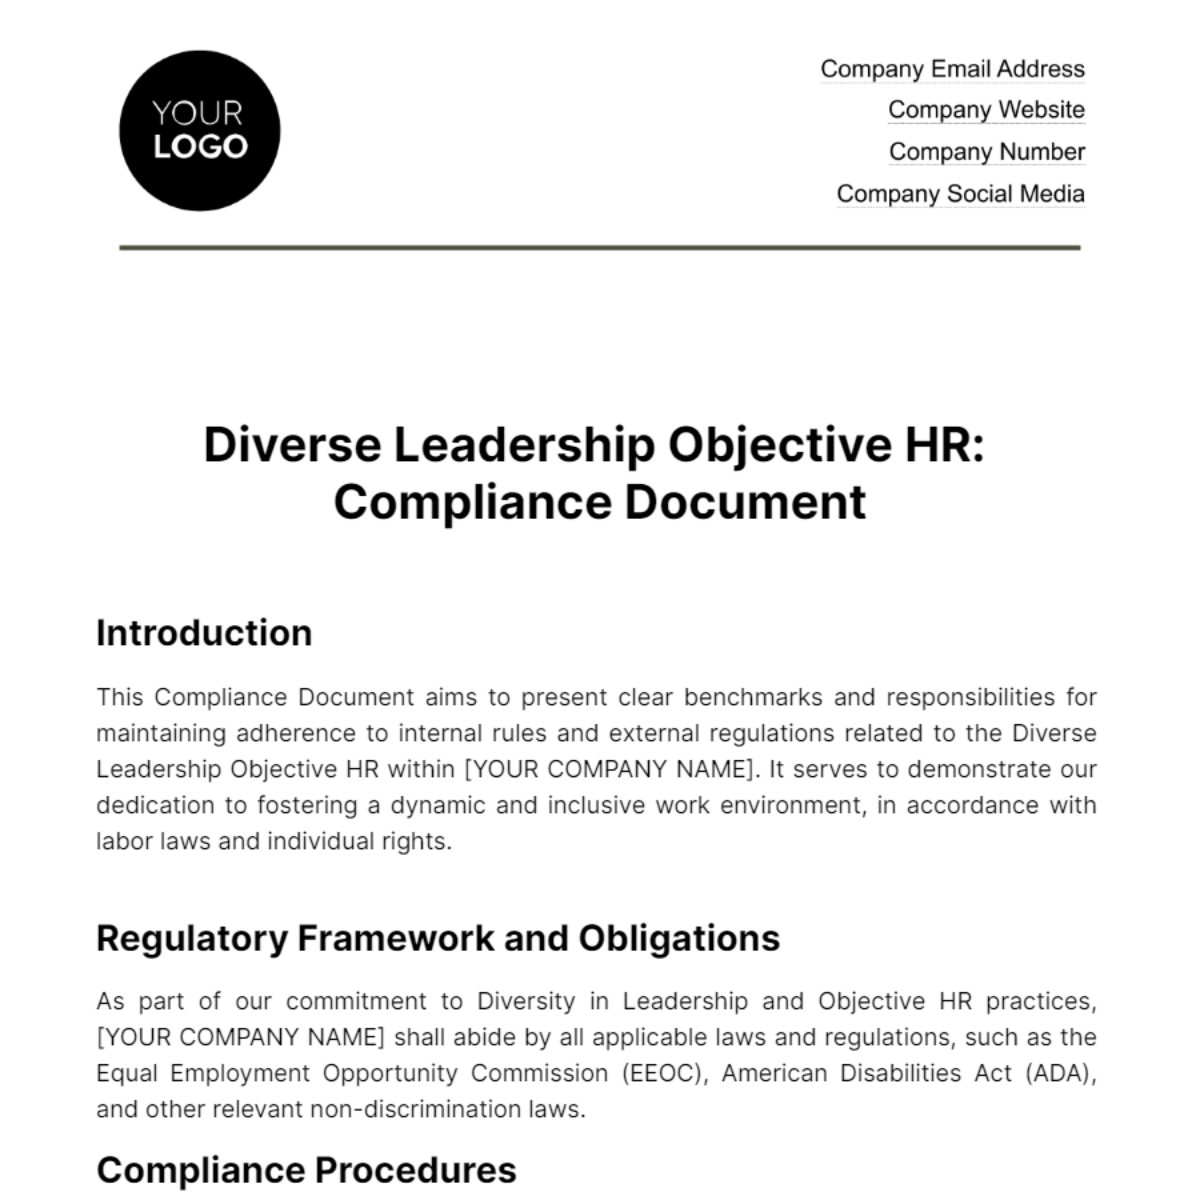 Diverse Leadership Objective HR Template